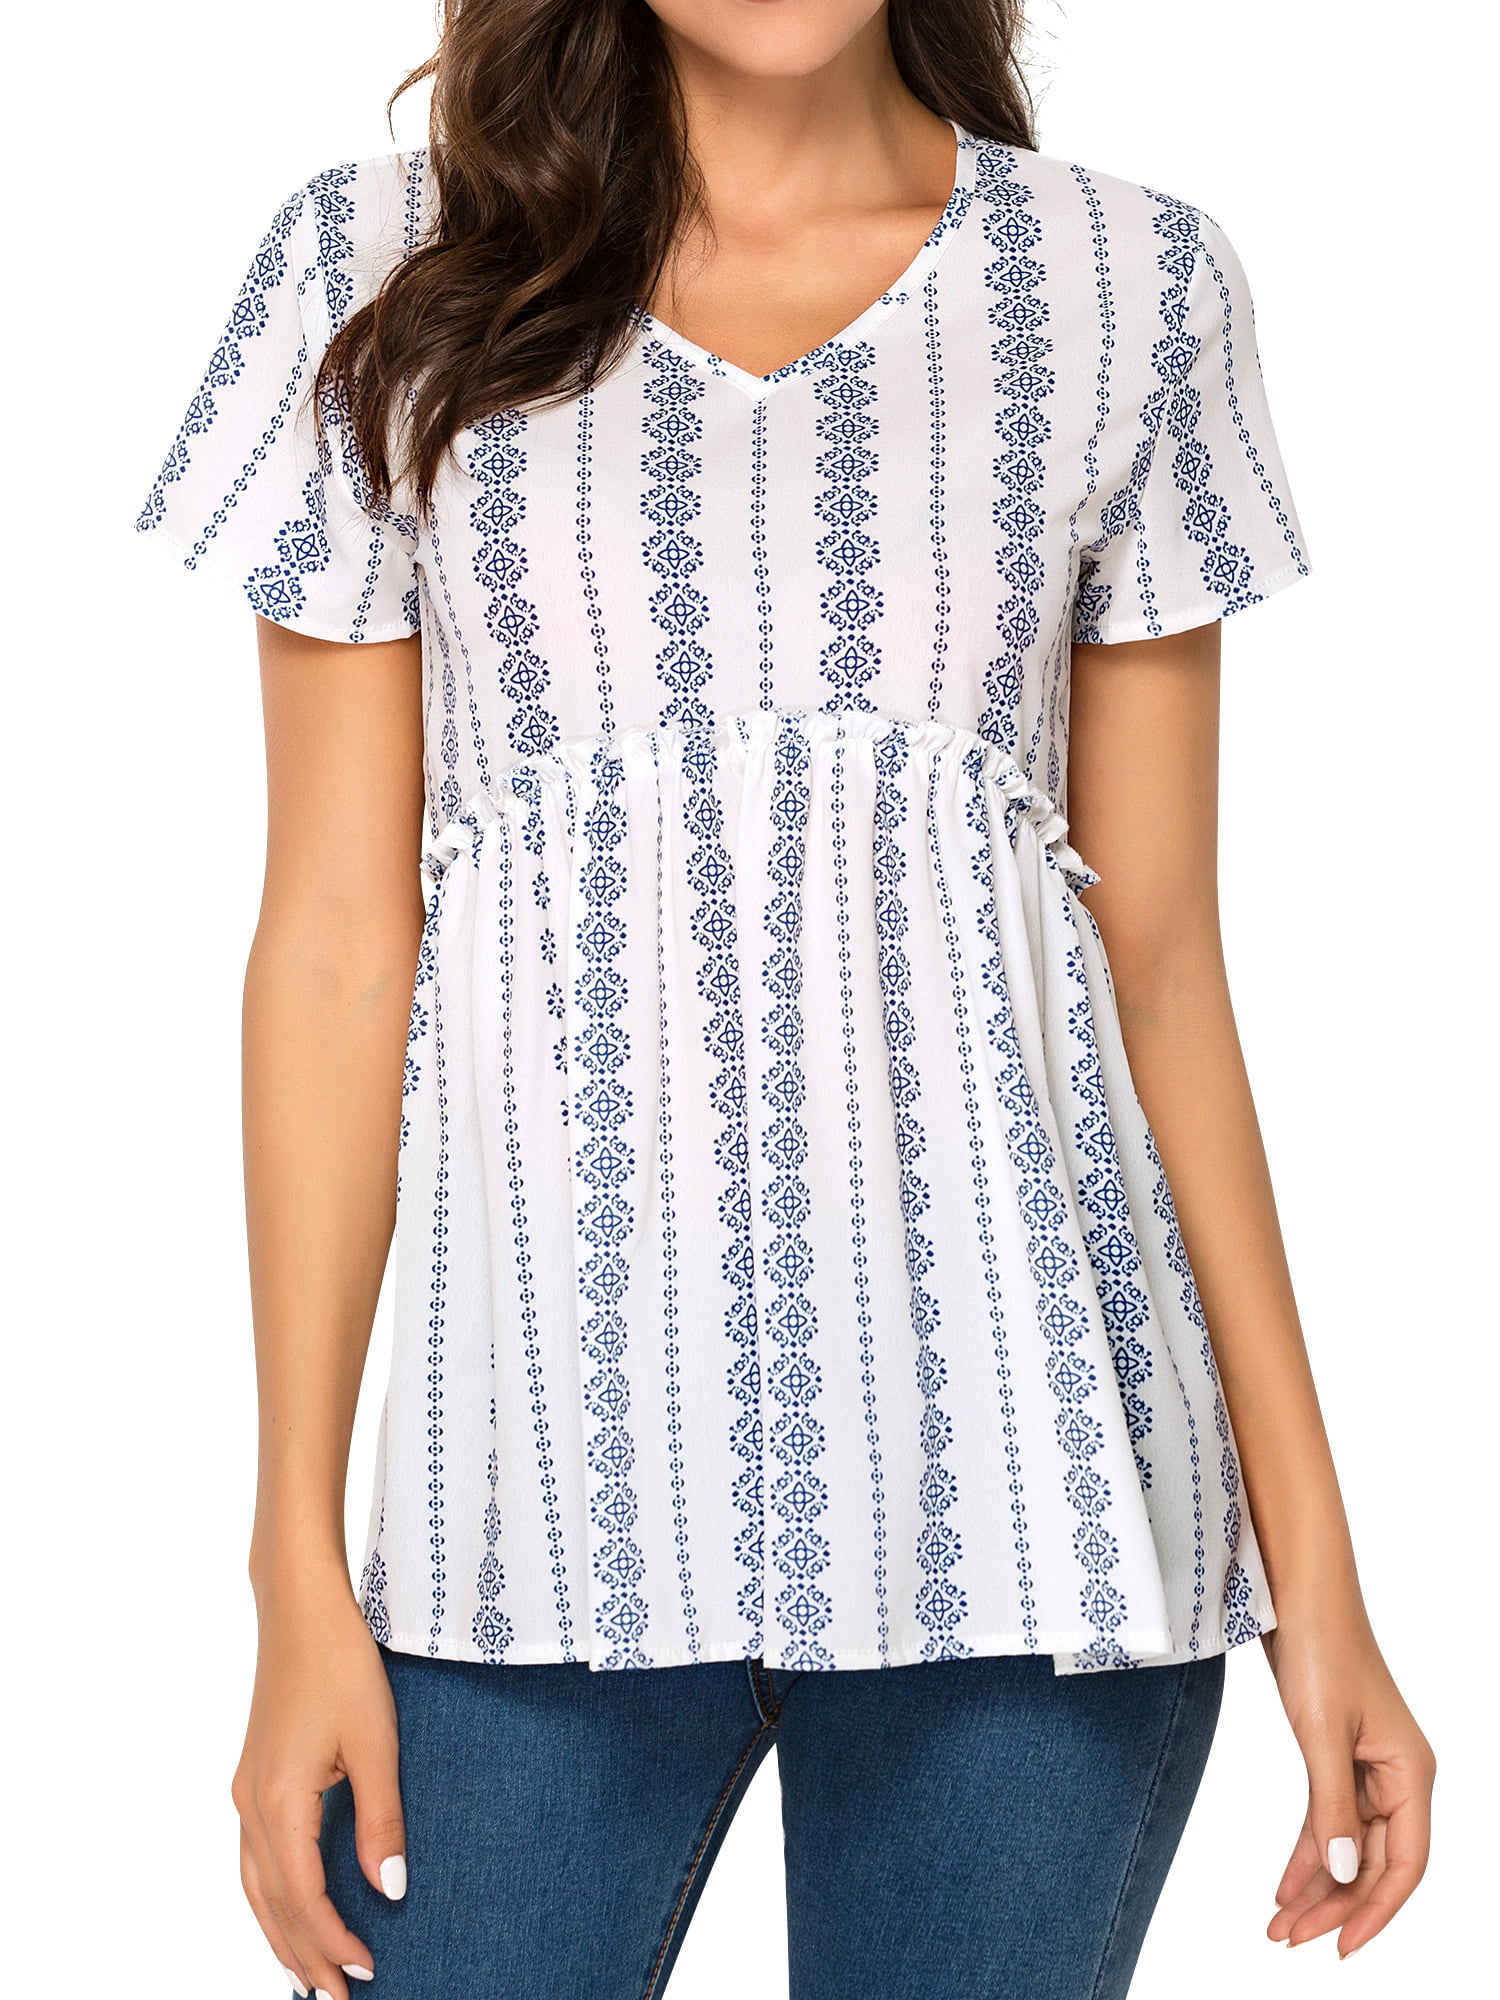 LiC-Store Women V Neck Button Down Blouses Tops Short Sleeves Flowers Printed T-Shirt